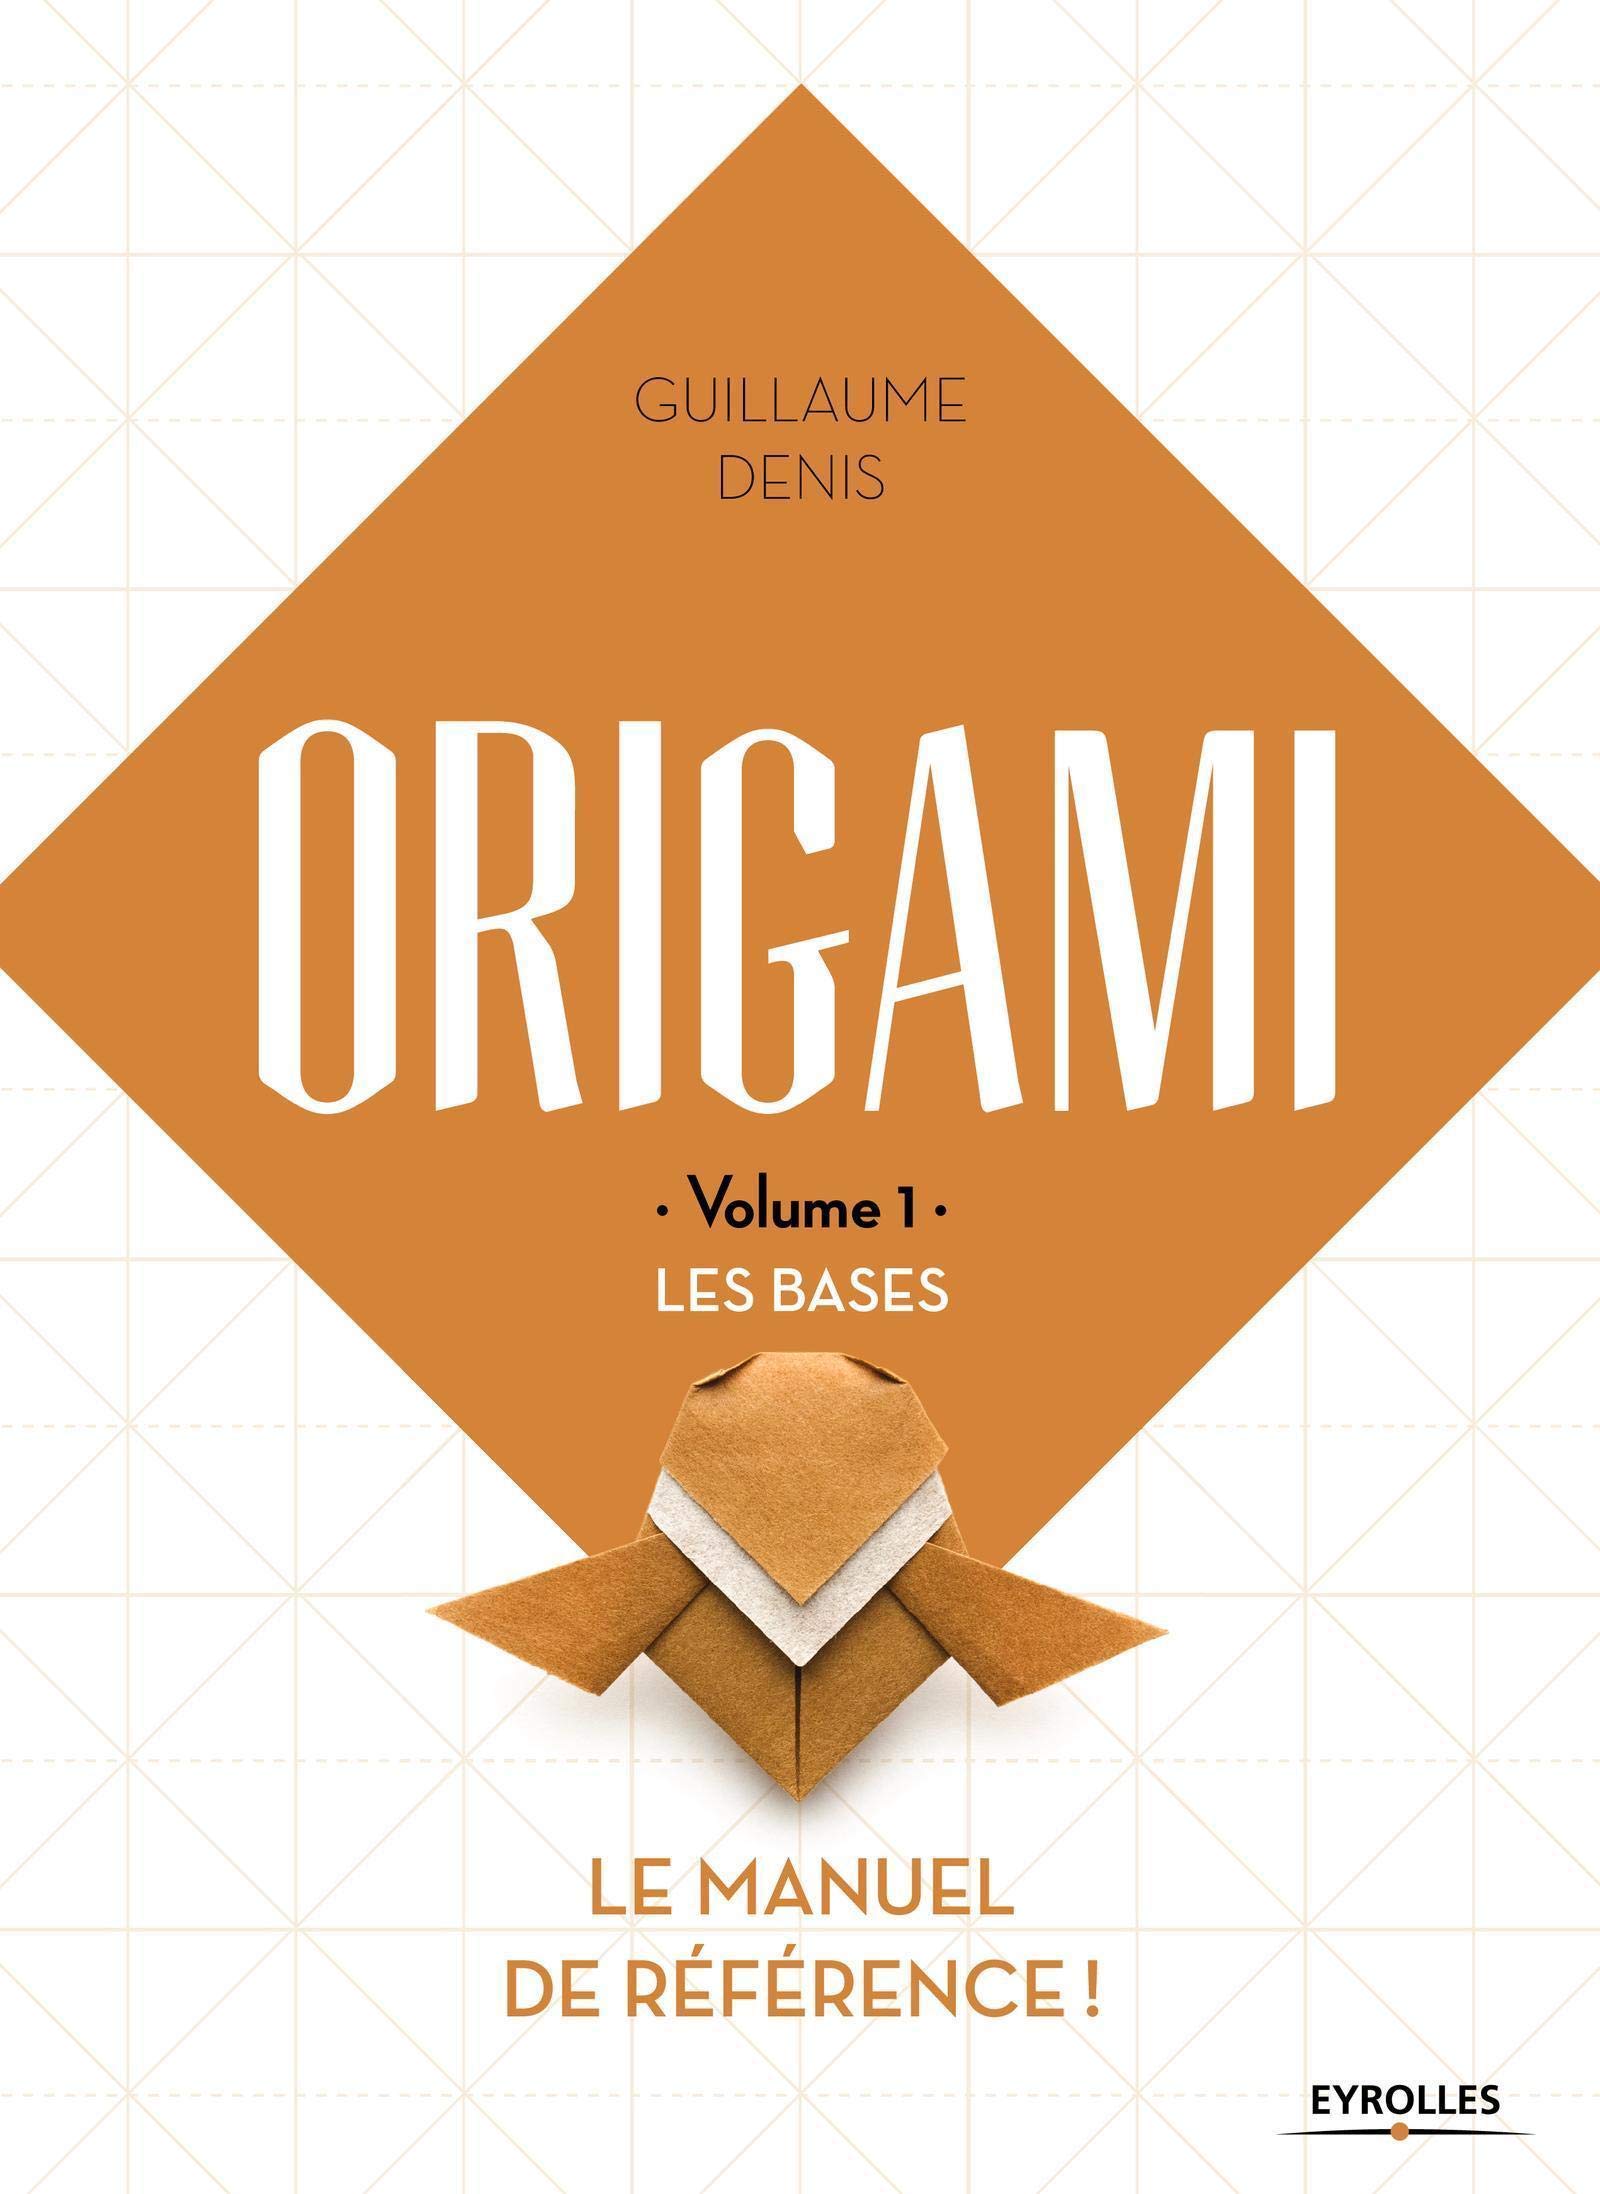 ORIGAMI - Volume 1 - LES BASES : page 53.